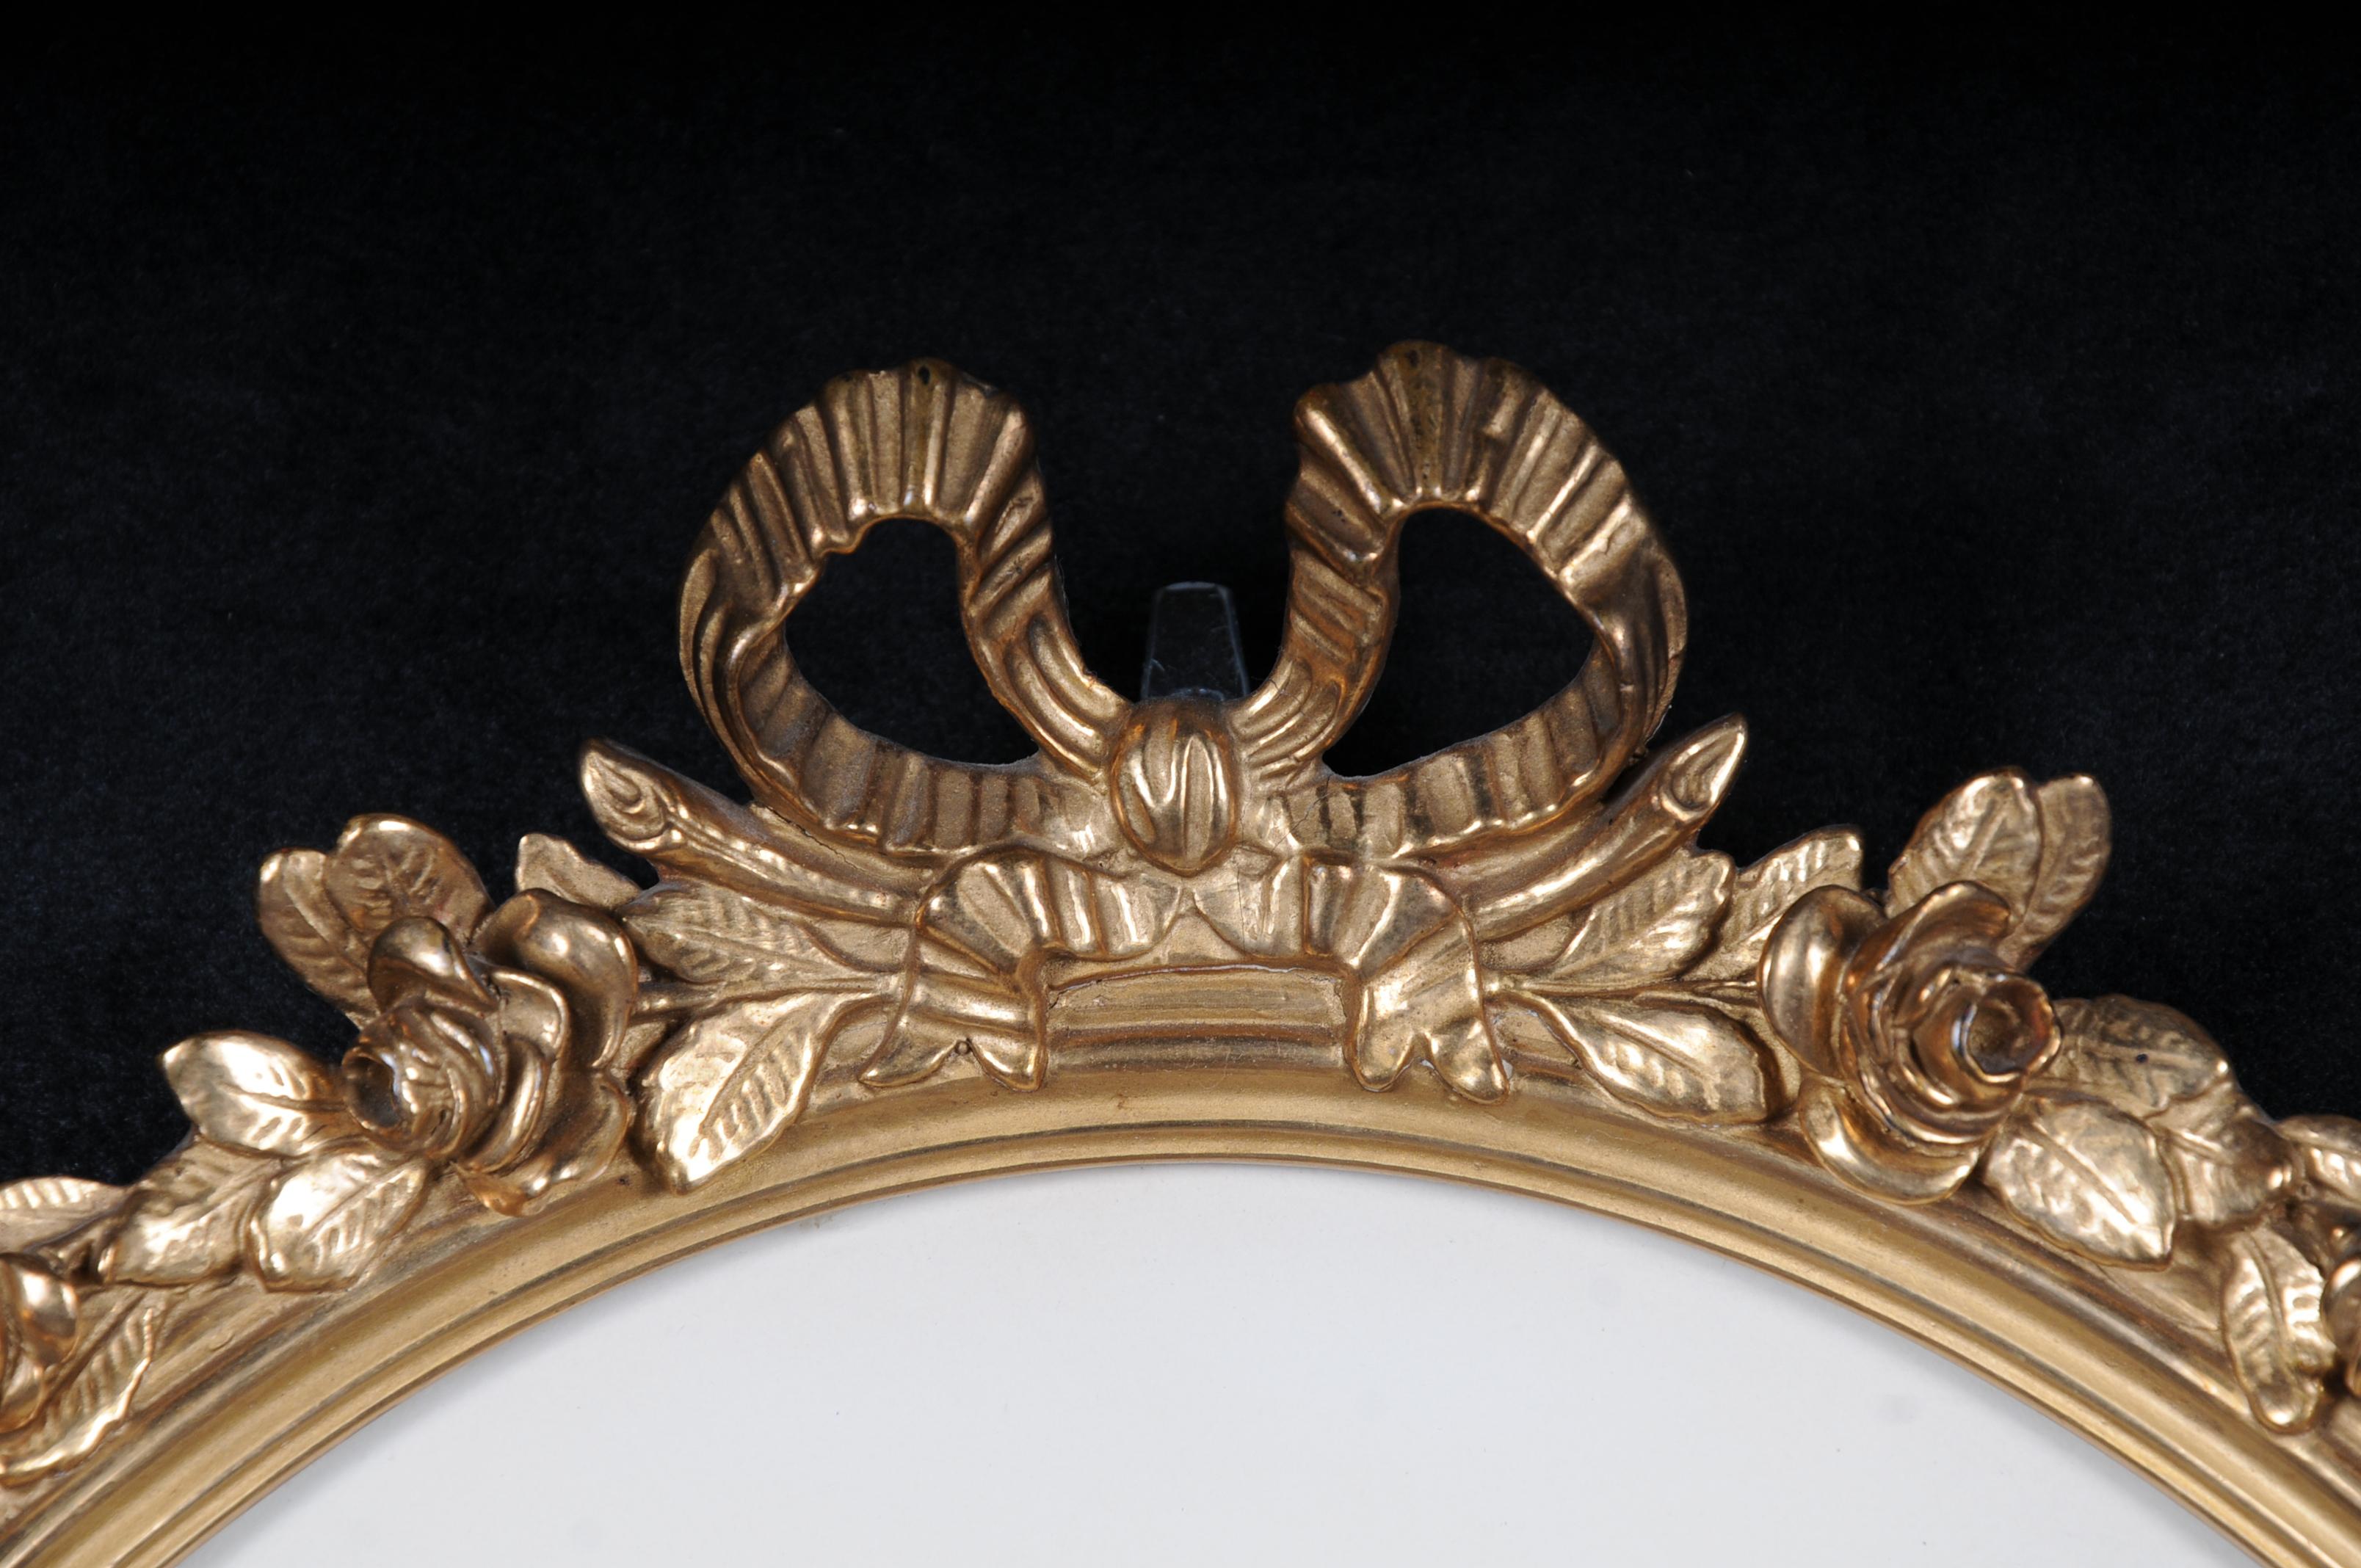 20th century French Louis XVI picture frame, gold


Oval body, solid wood, gilded with carved floral crowning ending with a classical bow.
The likeness of a portrait is signed but can be removed from the frame for personal use.